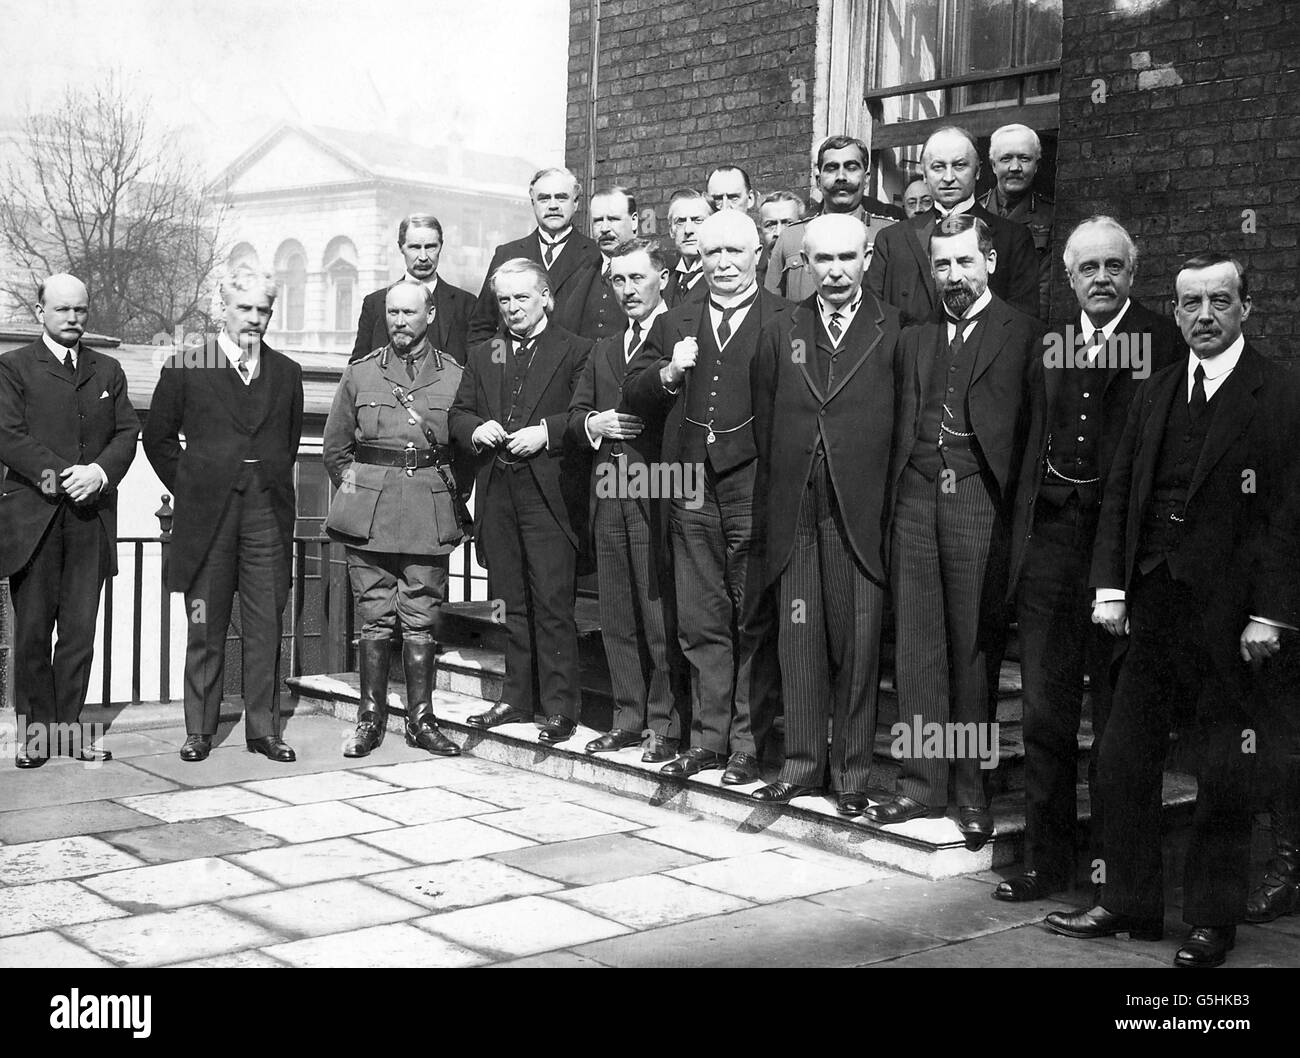 The first meeting of the Imperial War Cabinet at 10 Downing Street, which consisted of members from the British Cabinet and representatives of the Colonies and Dominions. Front row: (left to right) Walter Long, Sir Robert Border, Lt General Smuts, David Lloyd George, Sir James Meston, William Massey, Robert Rogers, George Perley, Arthur Balfour, Arthur Henderson, and Sir Maurice Hankie. Back row: (left to right) Andrew Bonar Law, John Douglas Hazen, Sir Joseph Ward, Austin Chamberlain, Edward Carson, Sir Ganga Singh and Lord Curzon. Stock Photo